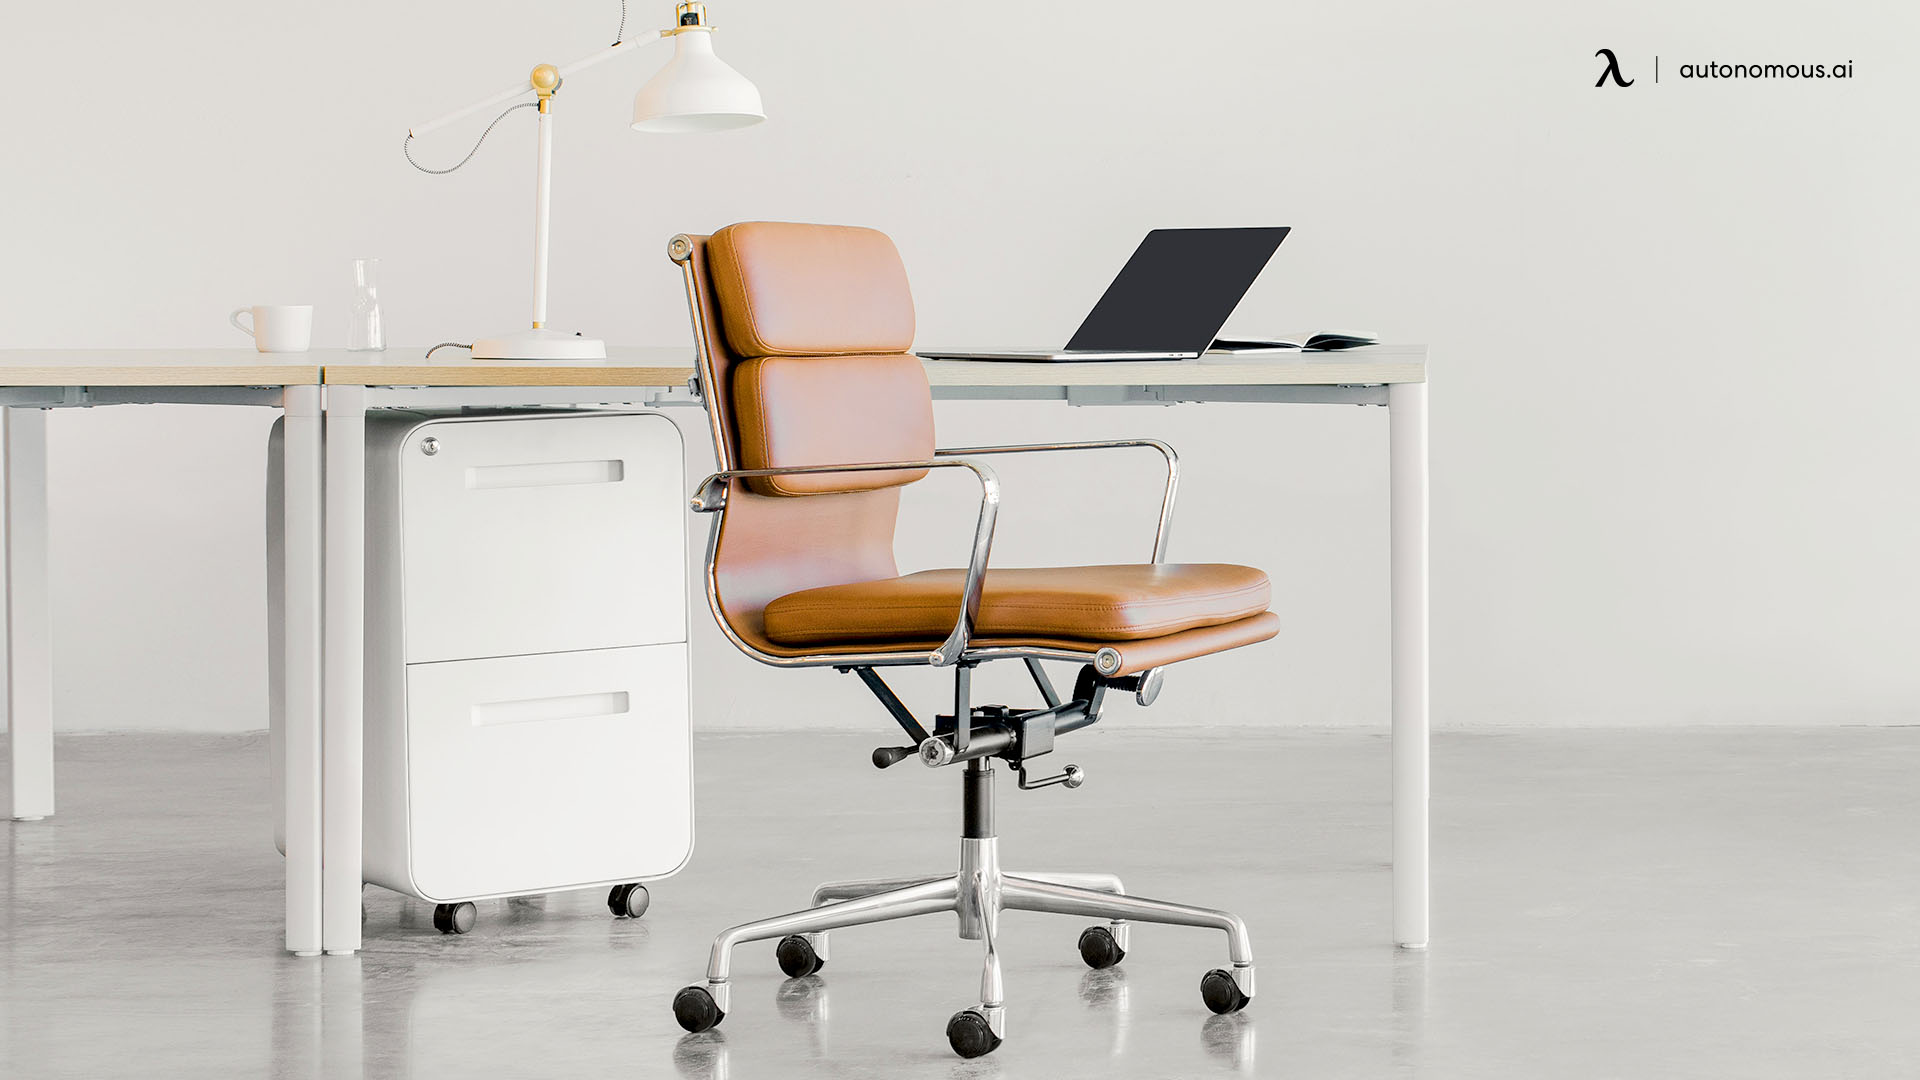 15 Best Modern Office Chair in Canada of 2022